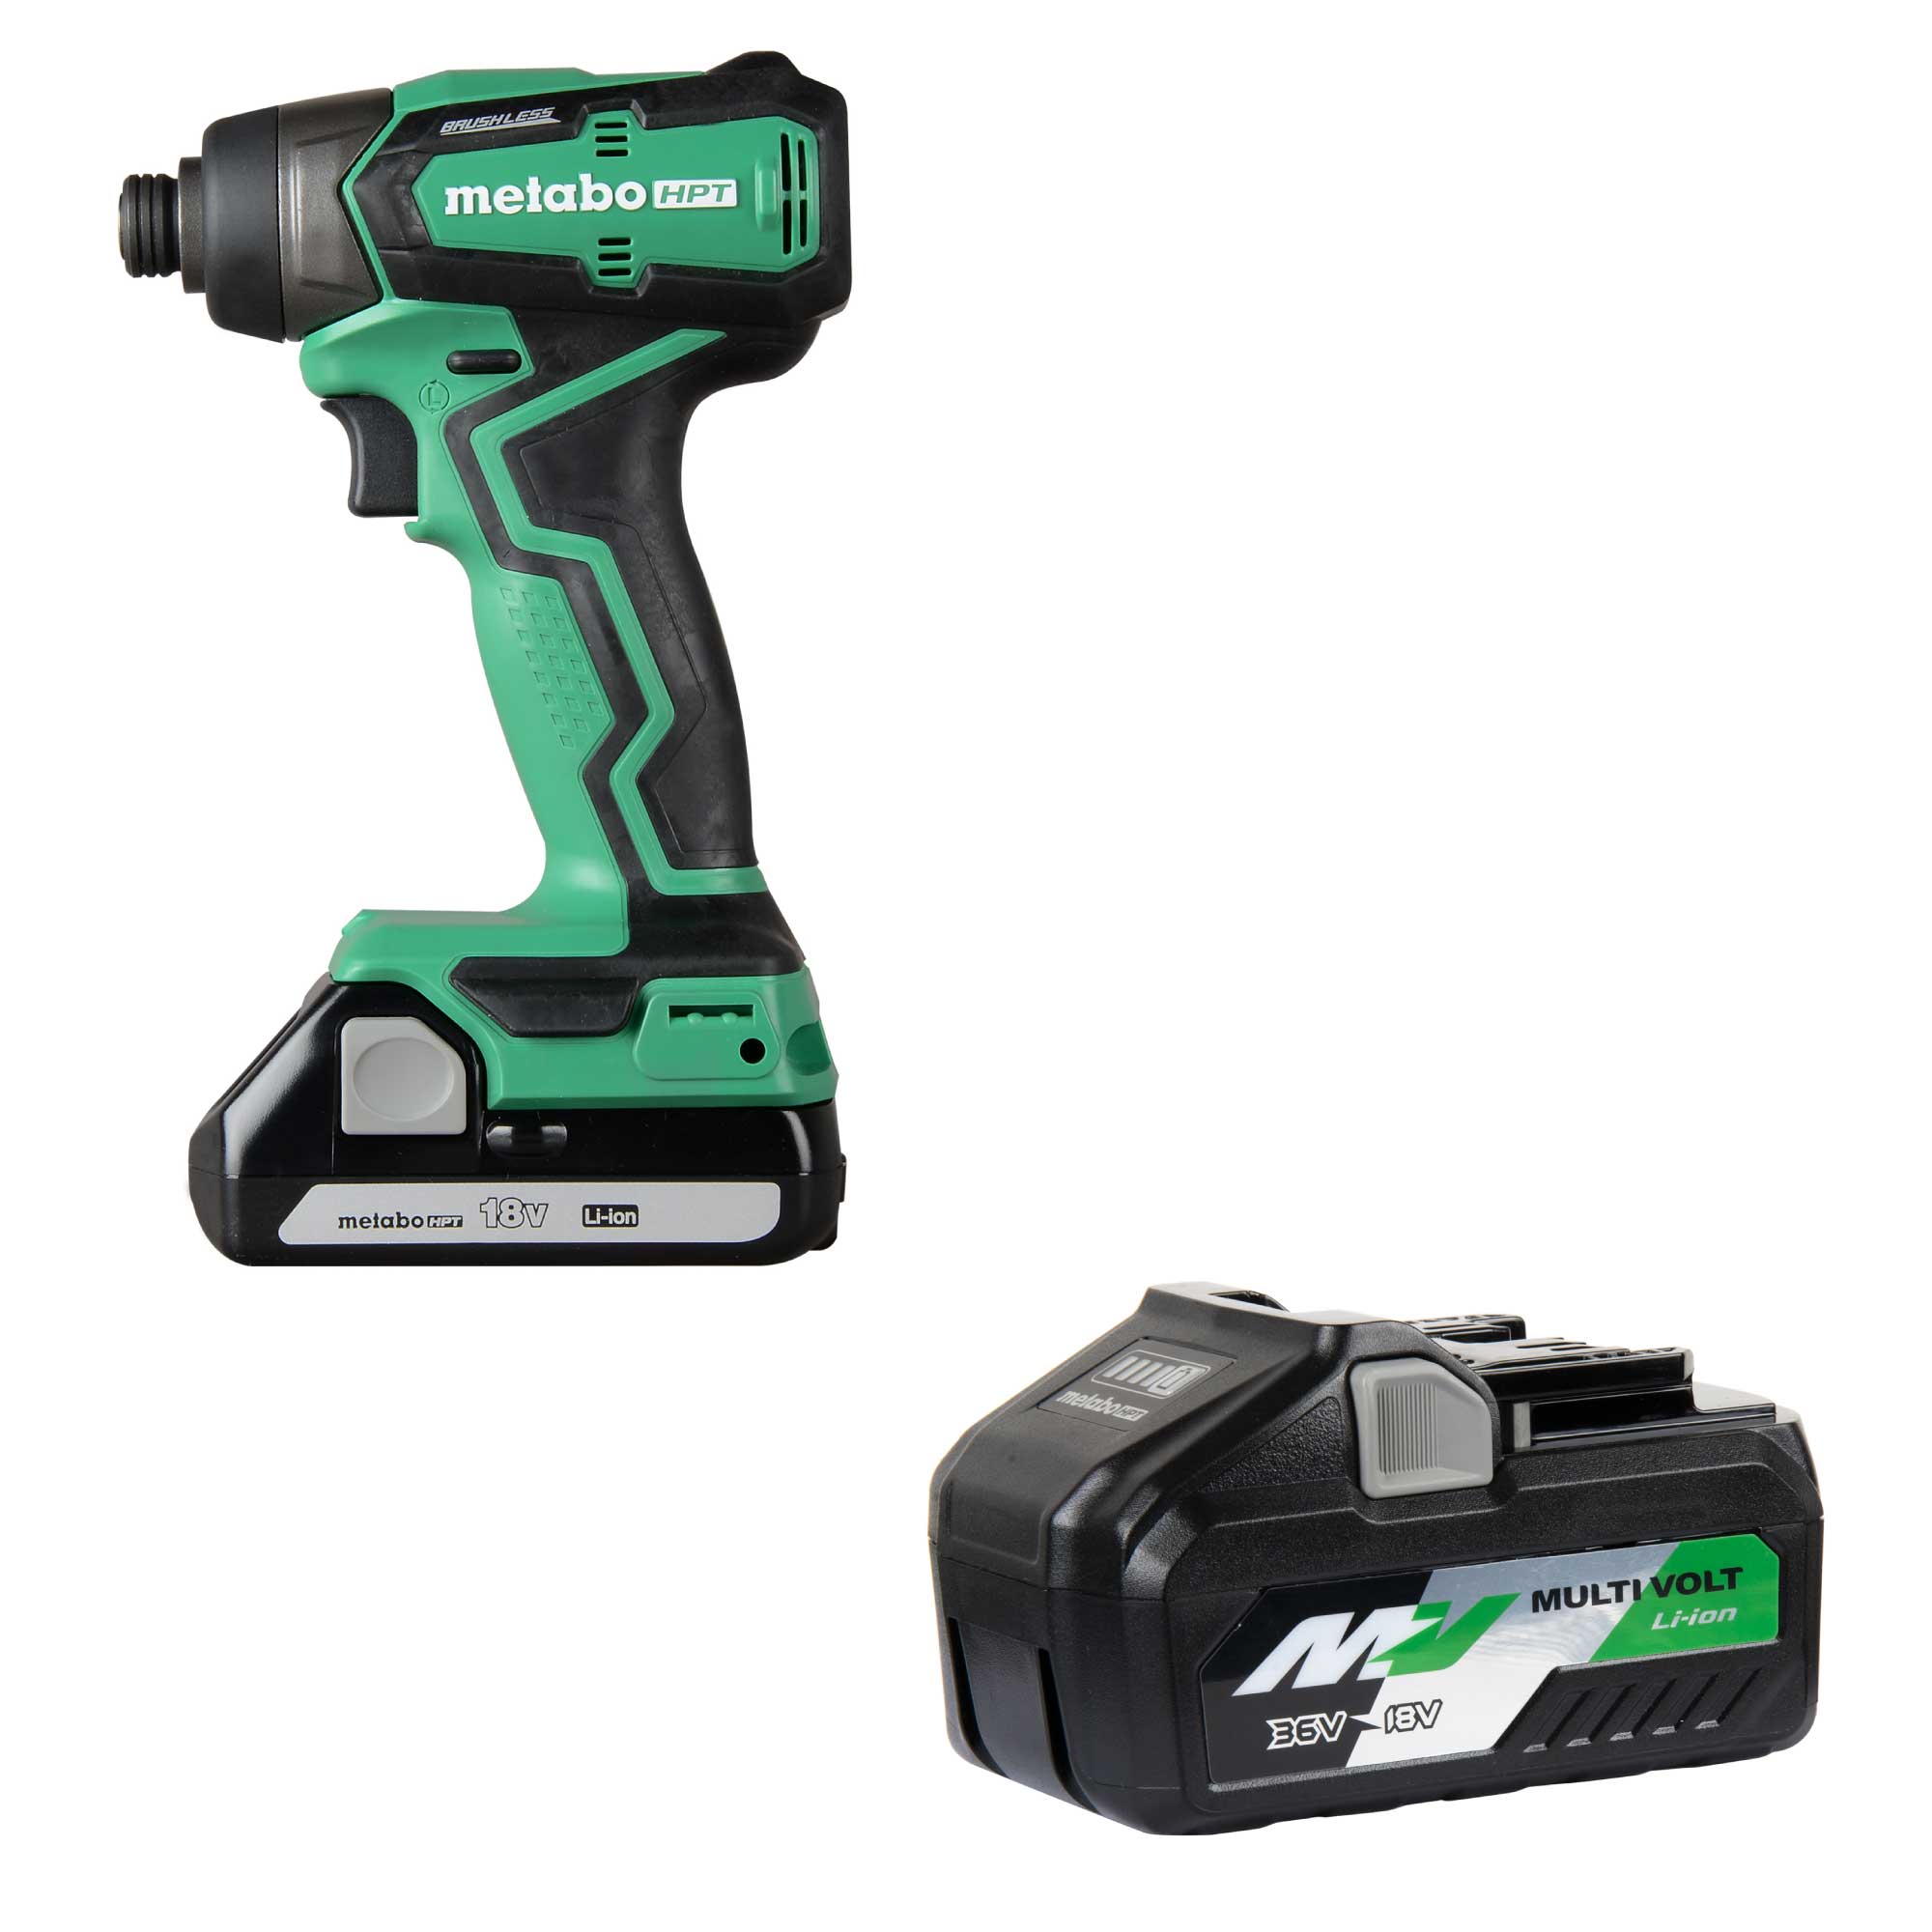 Metabo HPT 18-volt Variable Speed Brushless Cordless Impact Driver (2-batteries included) with MultiVolt 4.0Ah/8.0Ah Power Tool Battery Lowes.com